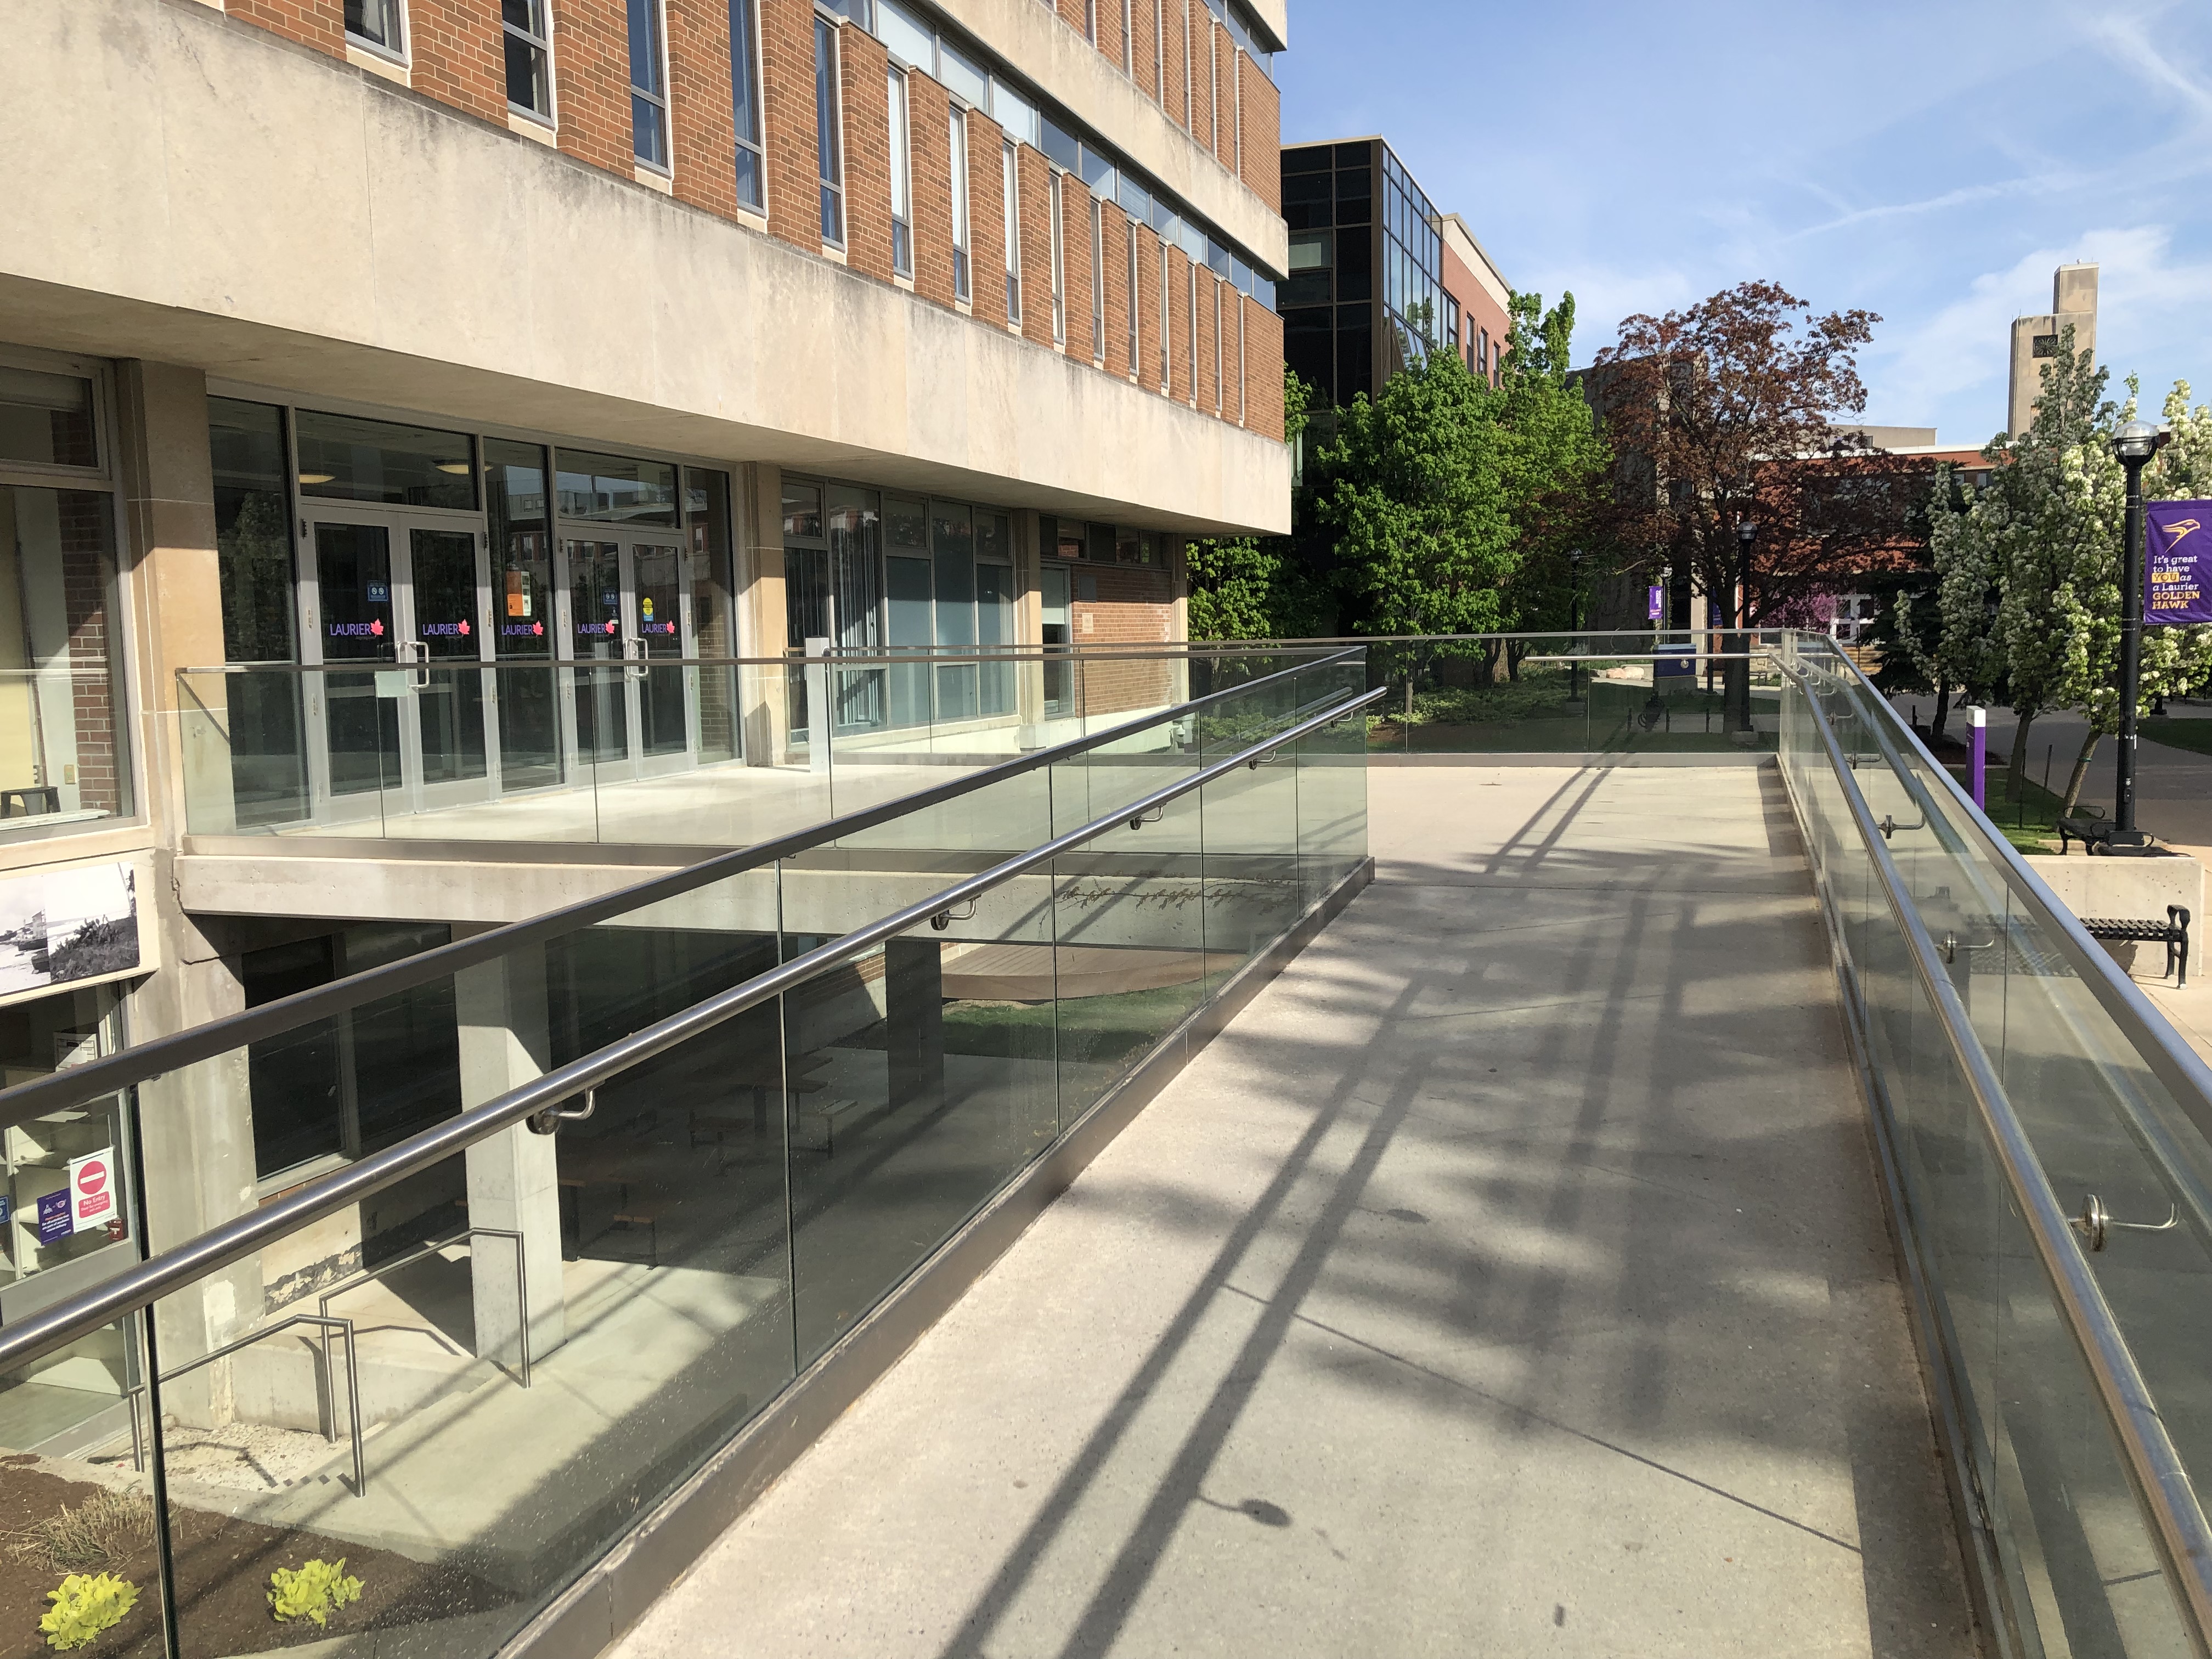 The second ascending ramp has hand rails along each side. It leads to a landing area. The landing area has a short walkway to the front doors of the library. The walkway has handrails along side of it.